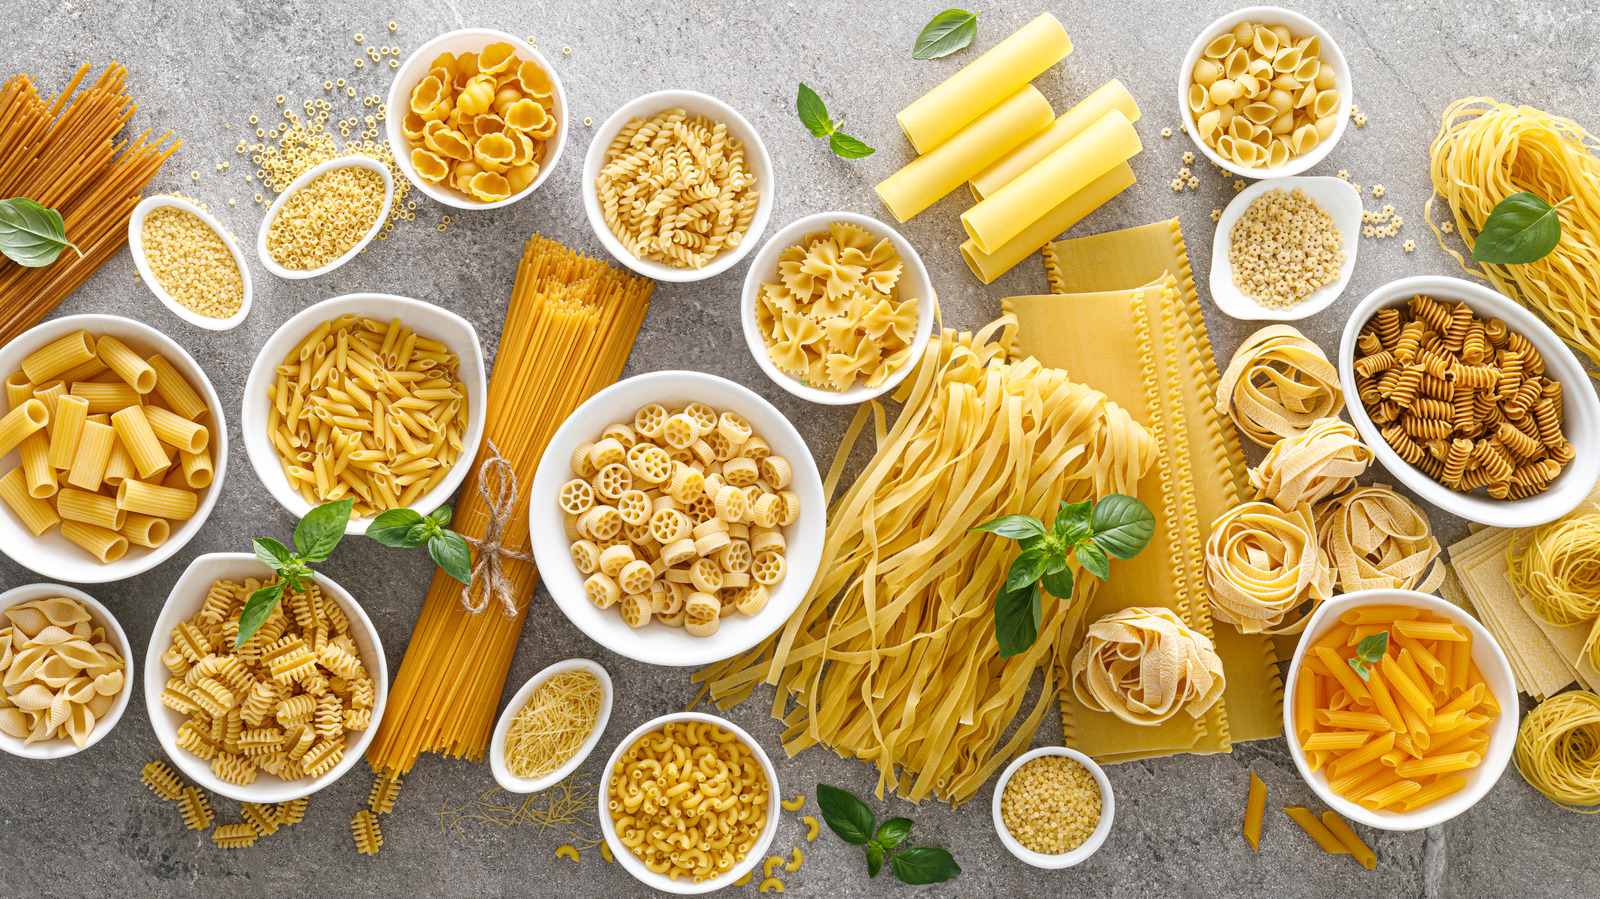 The world's oldest form of pasta would be unrecognizable today